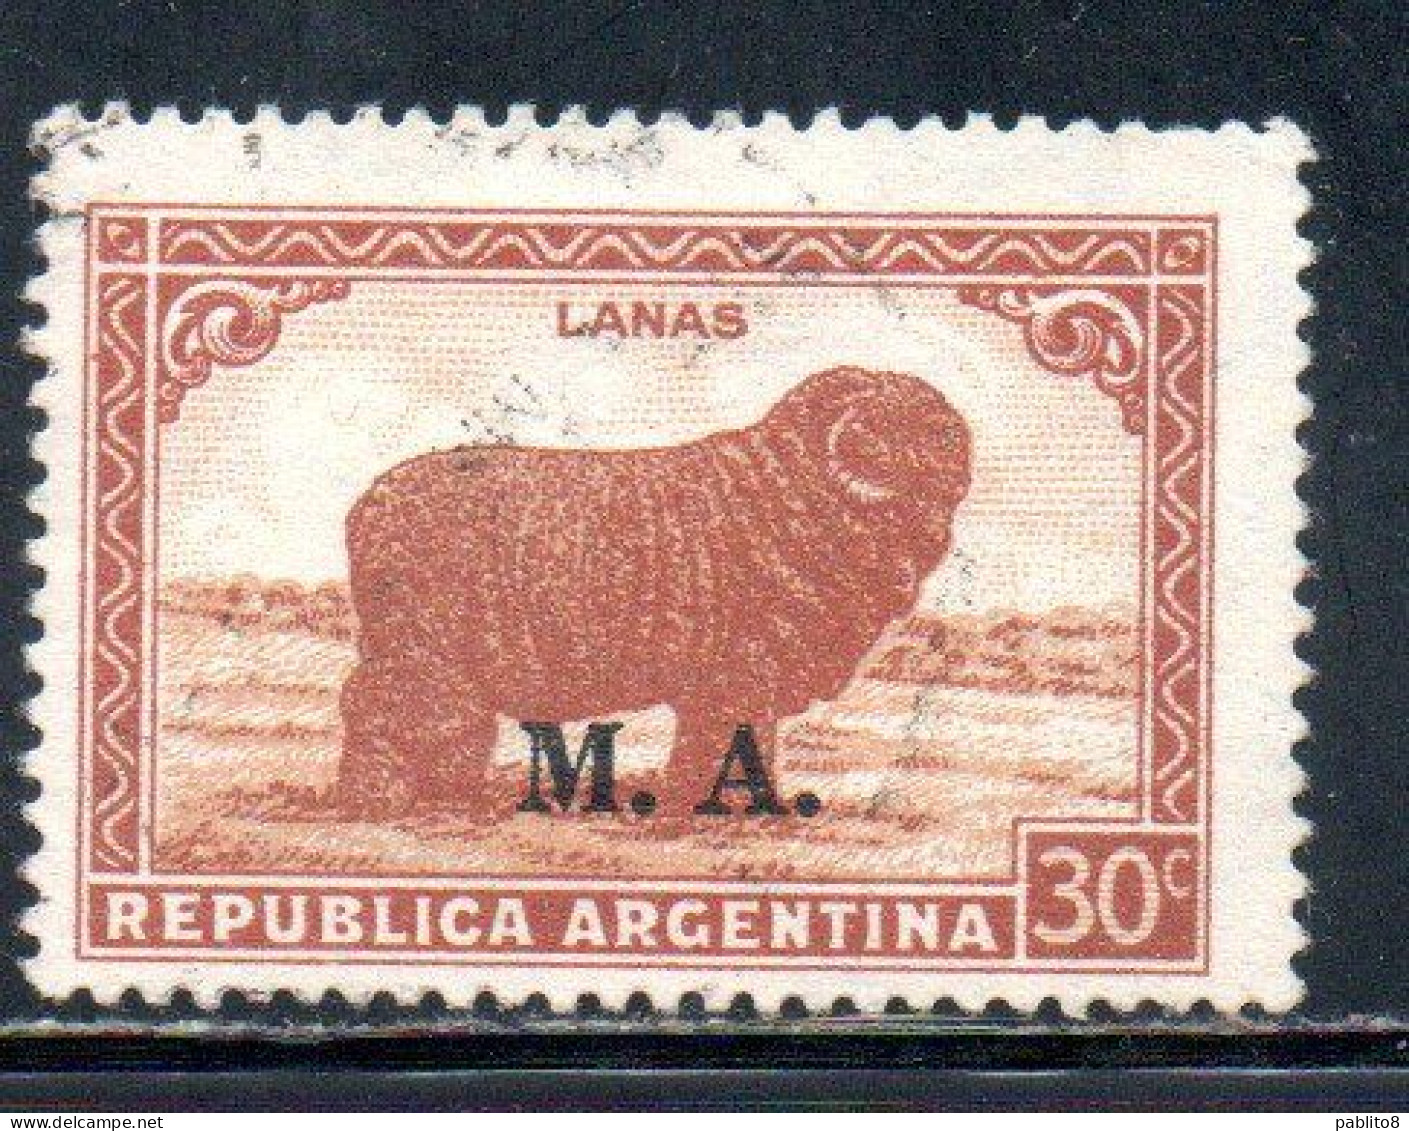 ARGENTINA 1935 1937 OFFICIAL DEPARTMENT STAMP OVERPRINTED M.A. MINISTRY OF AGRICULTURE MA 30c USED USADO - Dienstmarken